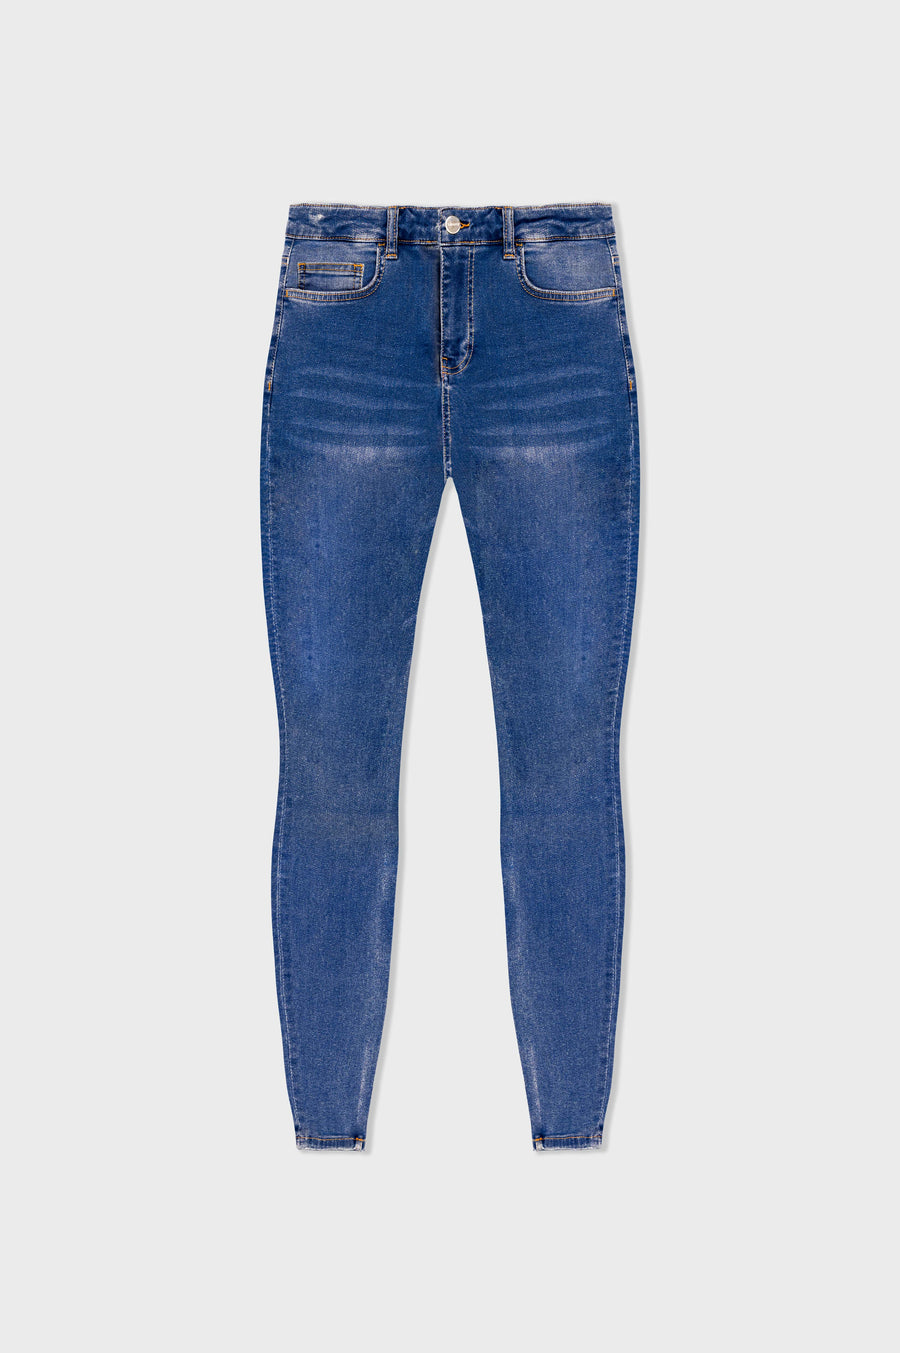 Legend London Jeans - spray on DARK BLUE JEANS - NON RIPPED